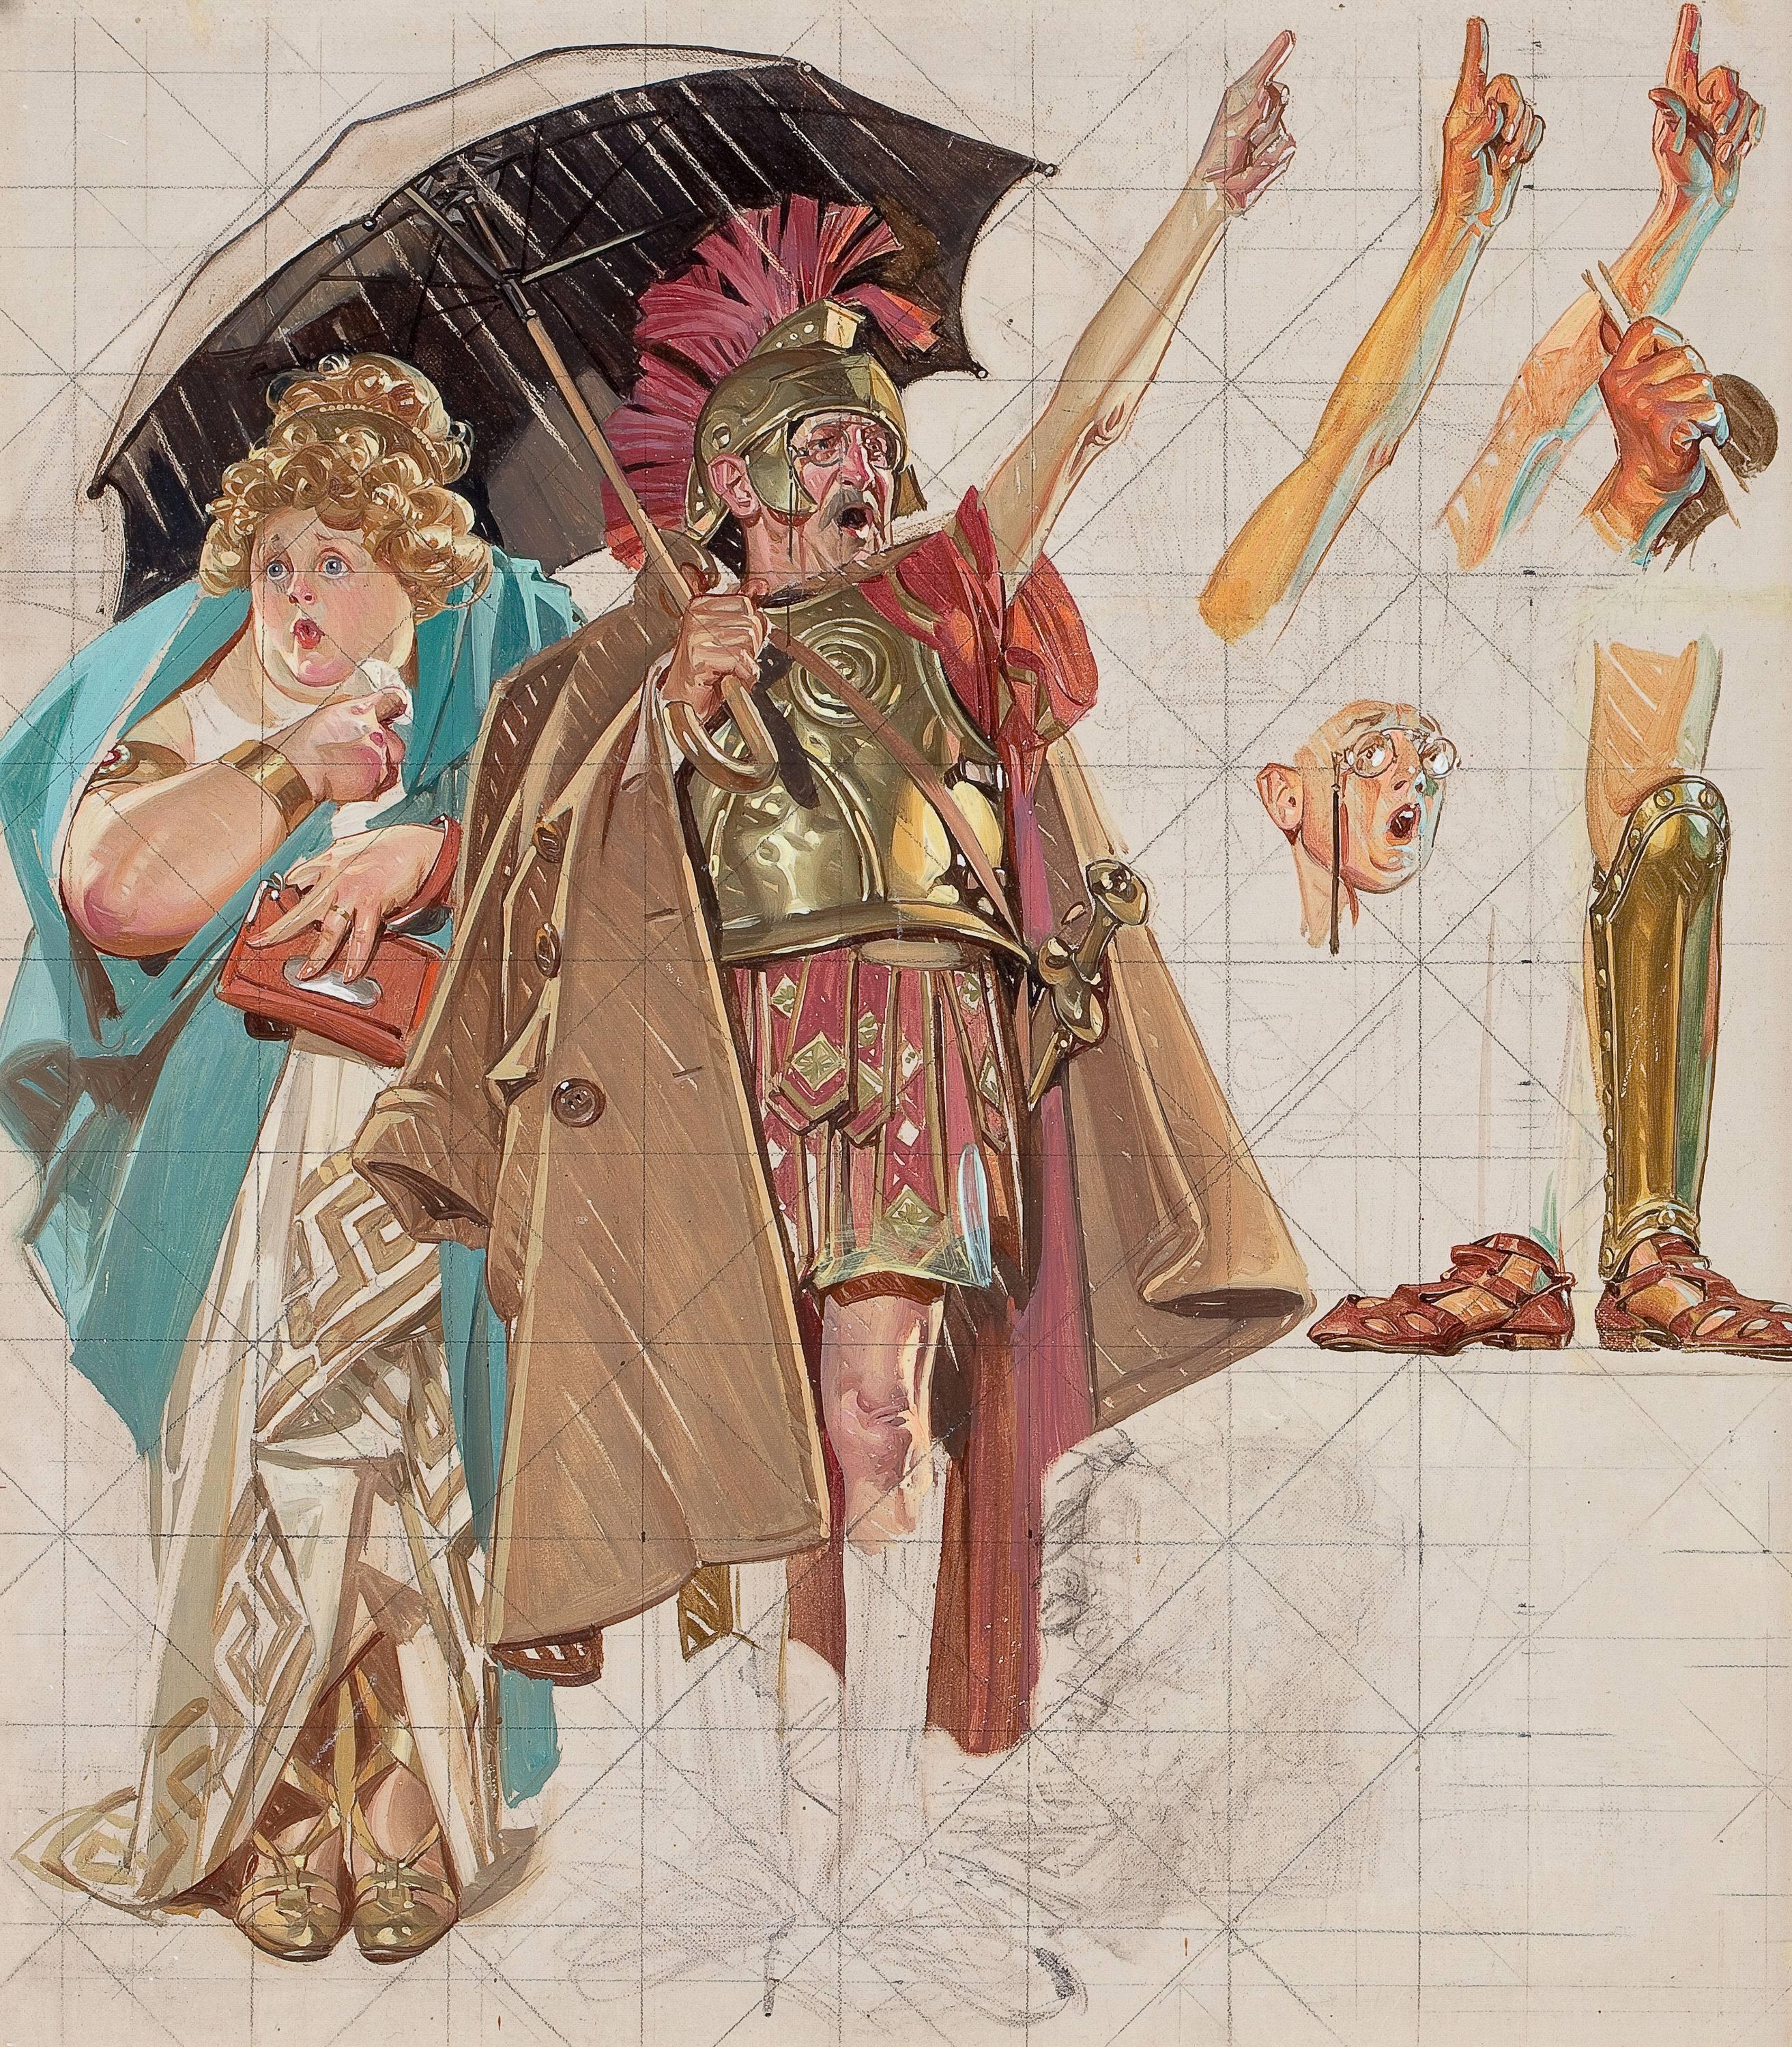 Joseph Christian Leyendecker Figurative Painting - Study for Saturday Evening Post Cover, March 10, 1934